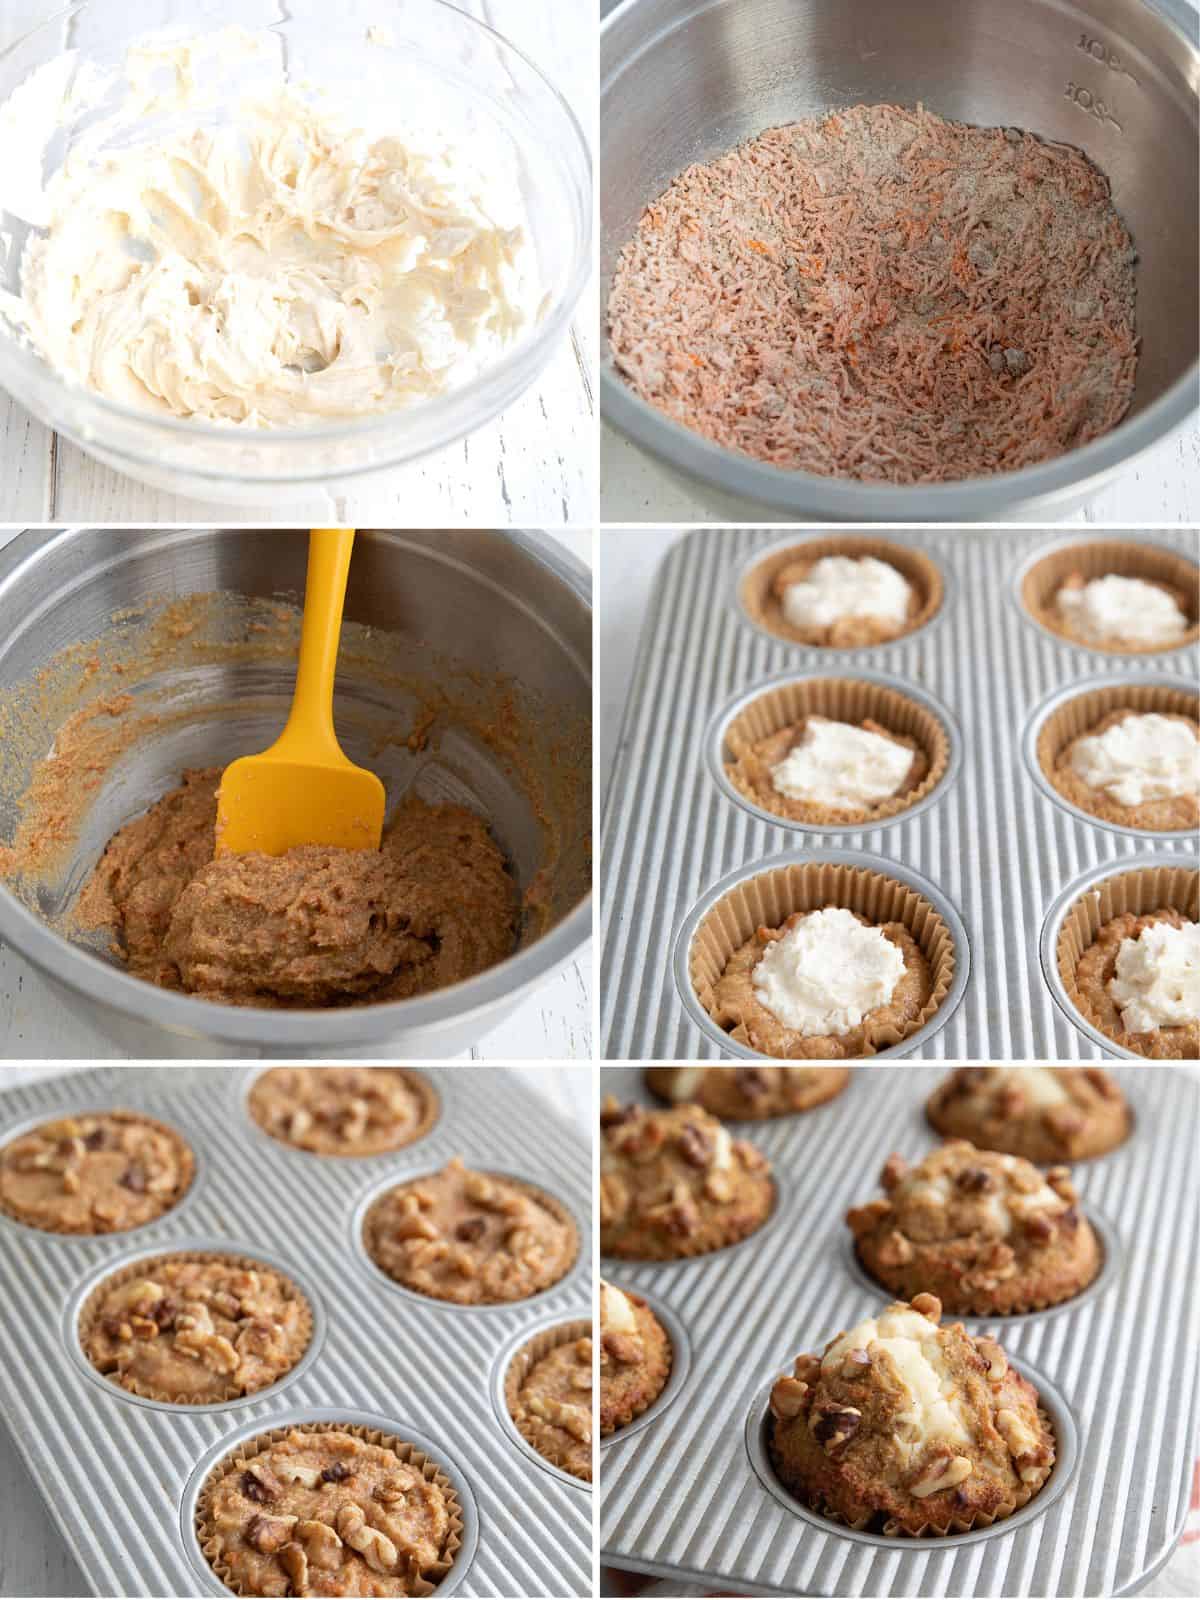 A collage of 6 images showing the steps for making Carrot Cake Muffins.